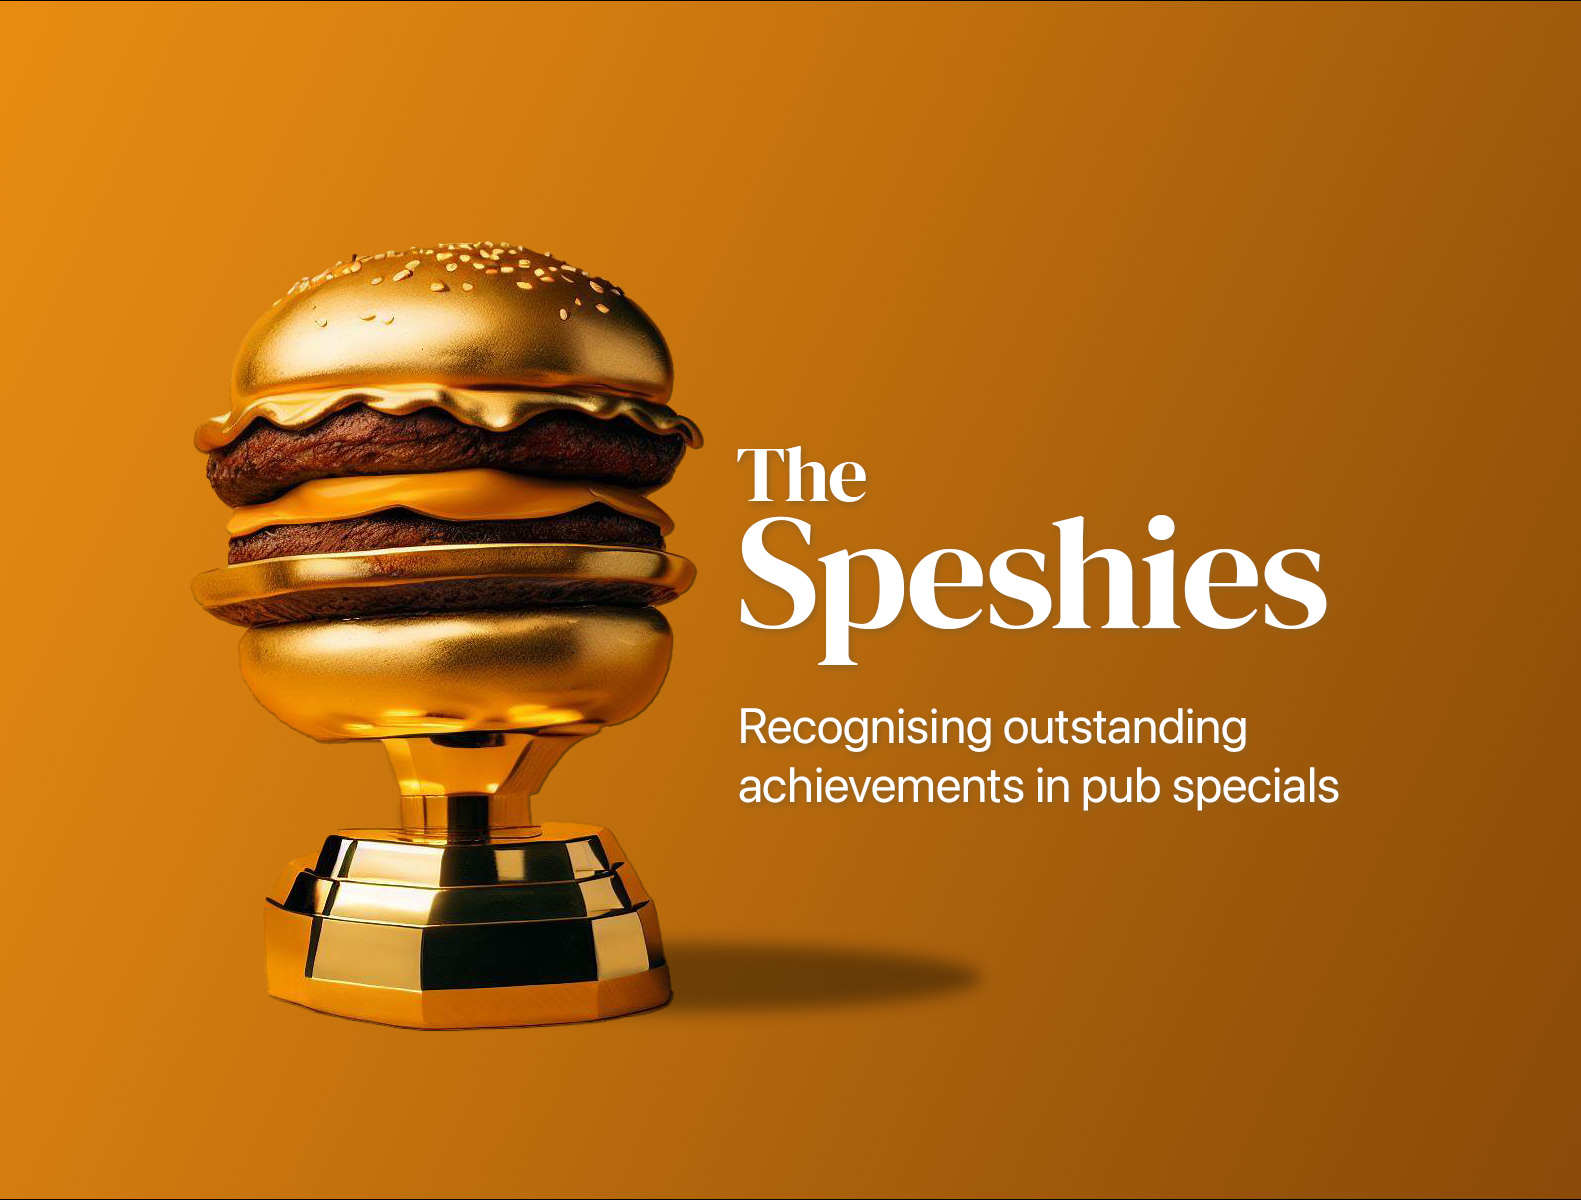 The Speshies: Recognising outstanding achievements in pub specials